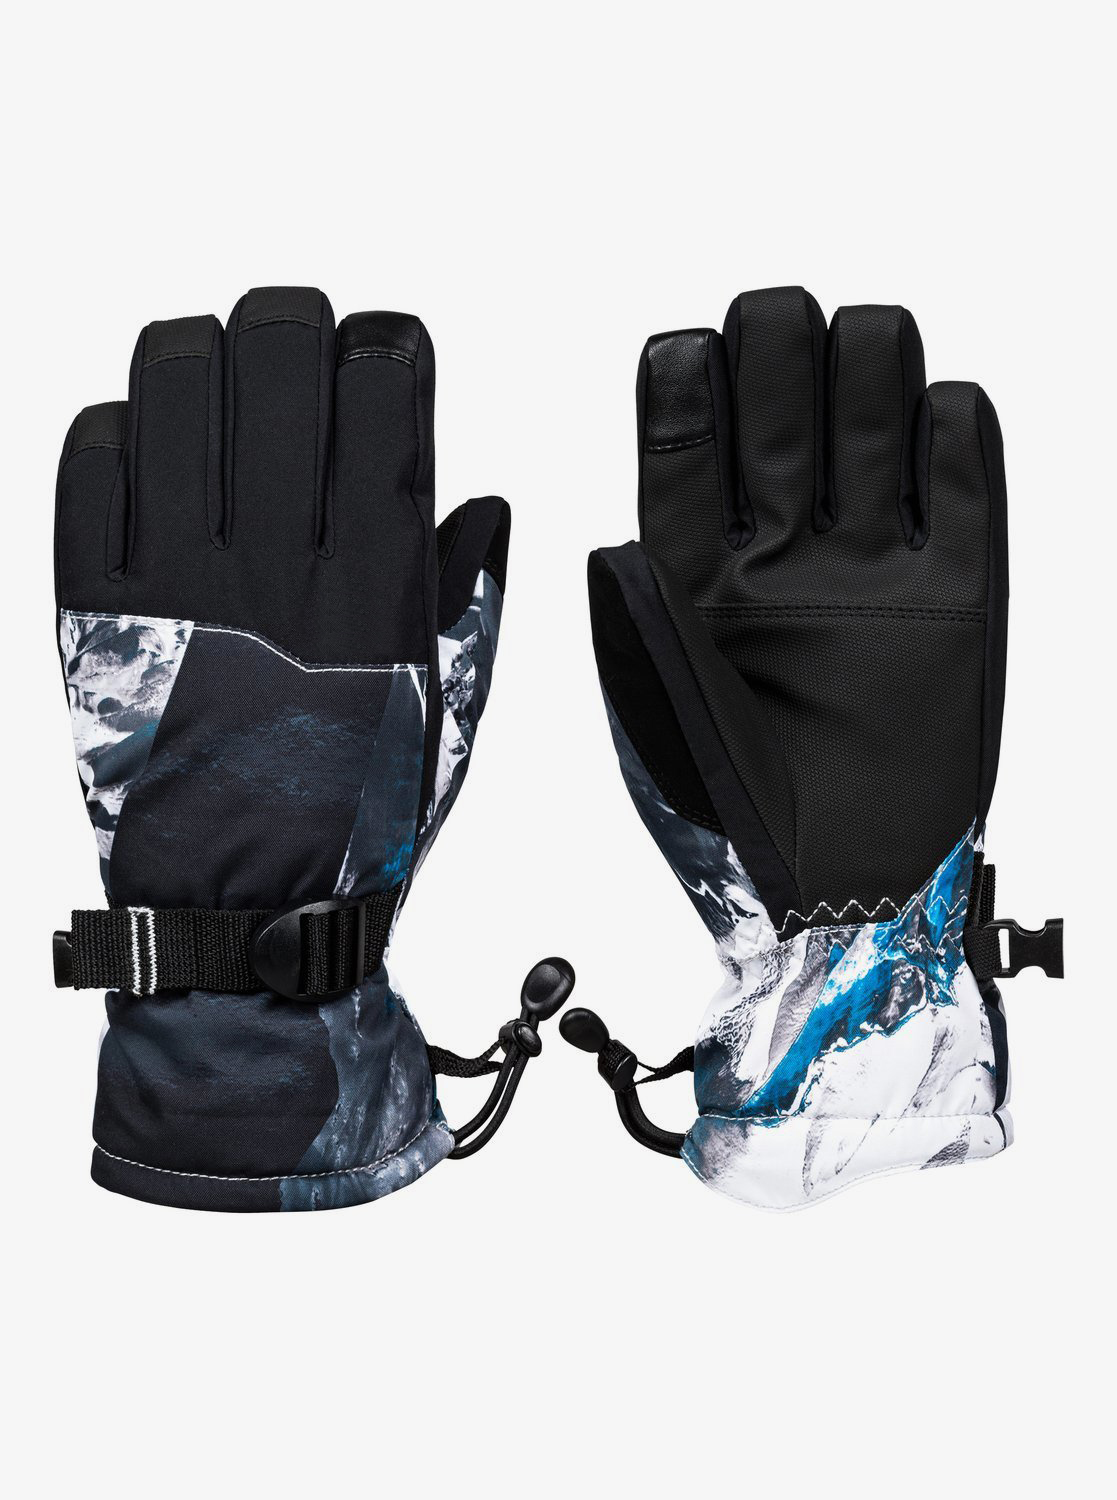 Bright-coloured breathable leather palm elastic touchscreen winter ski gloves